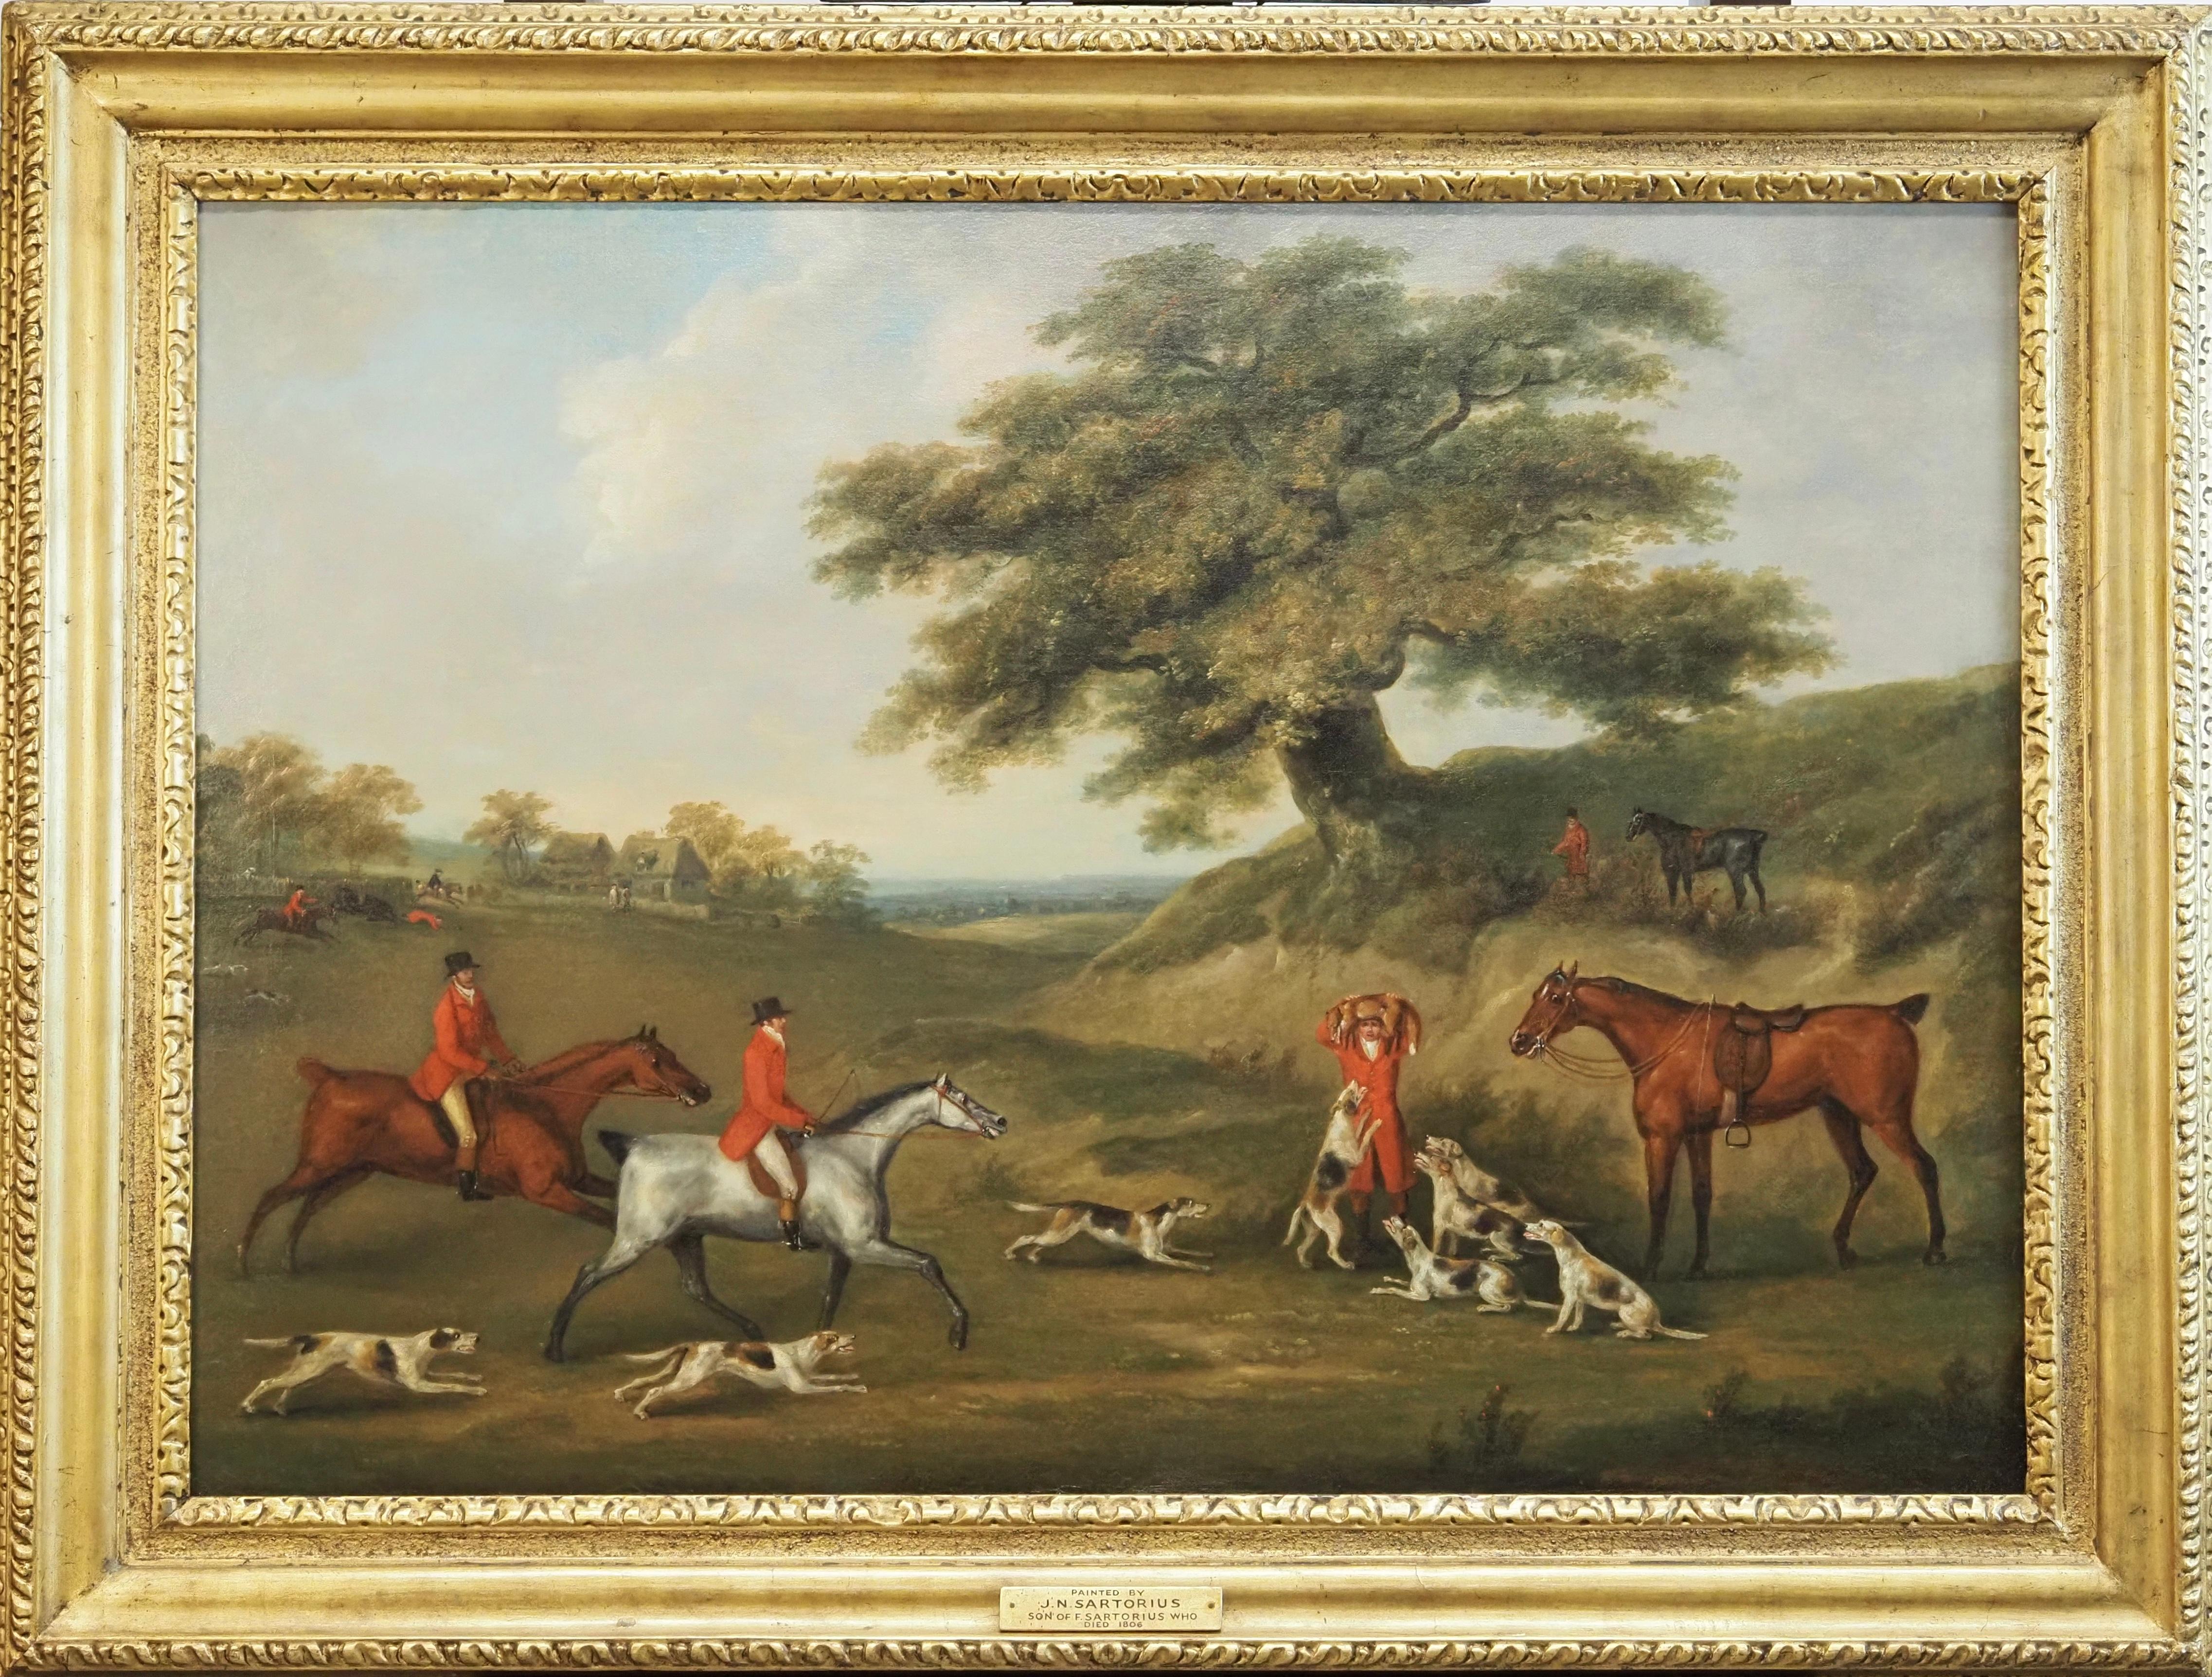 The Hunt - Painting by John Nost Sartorius